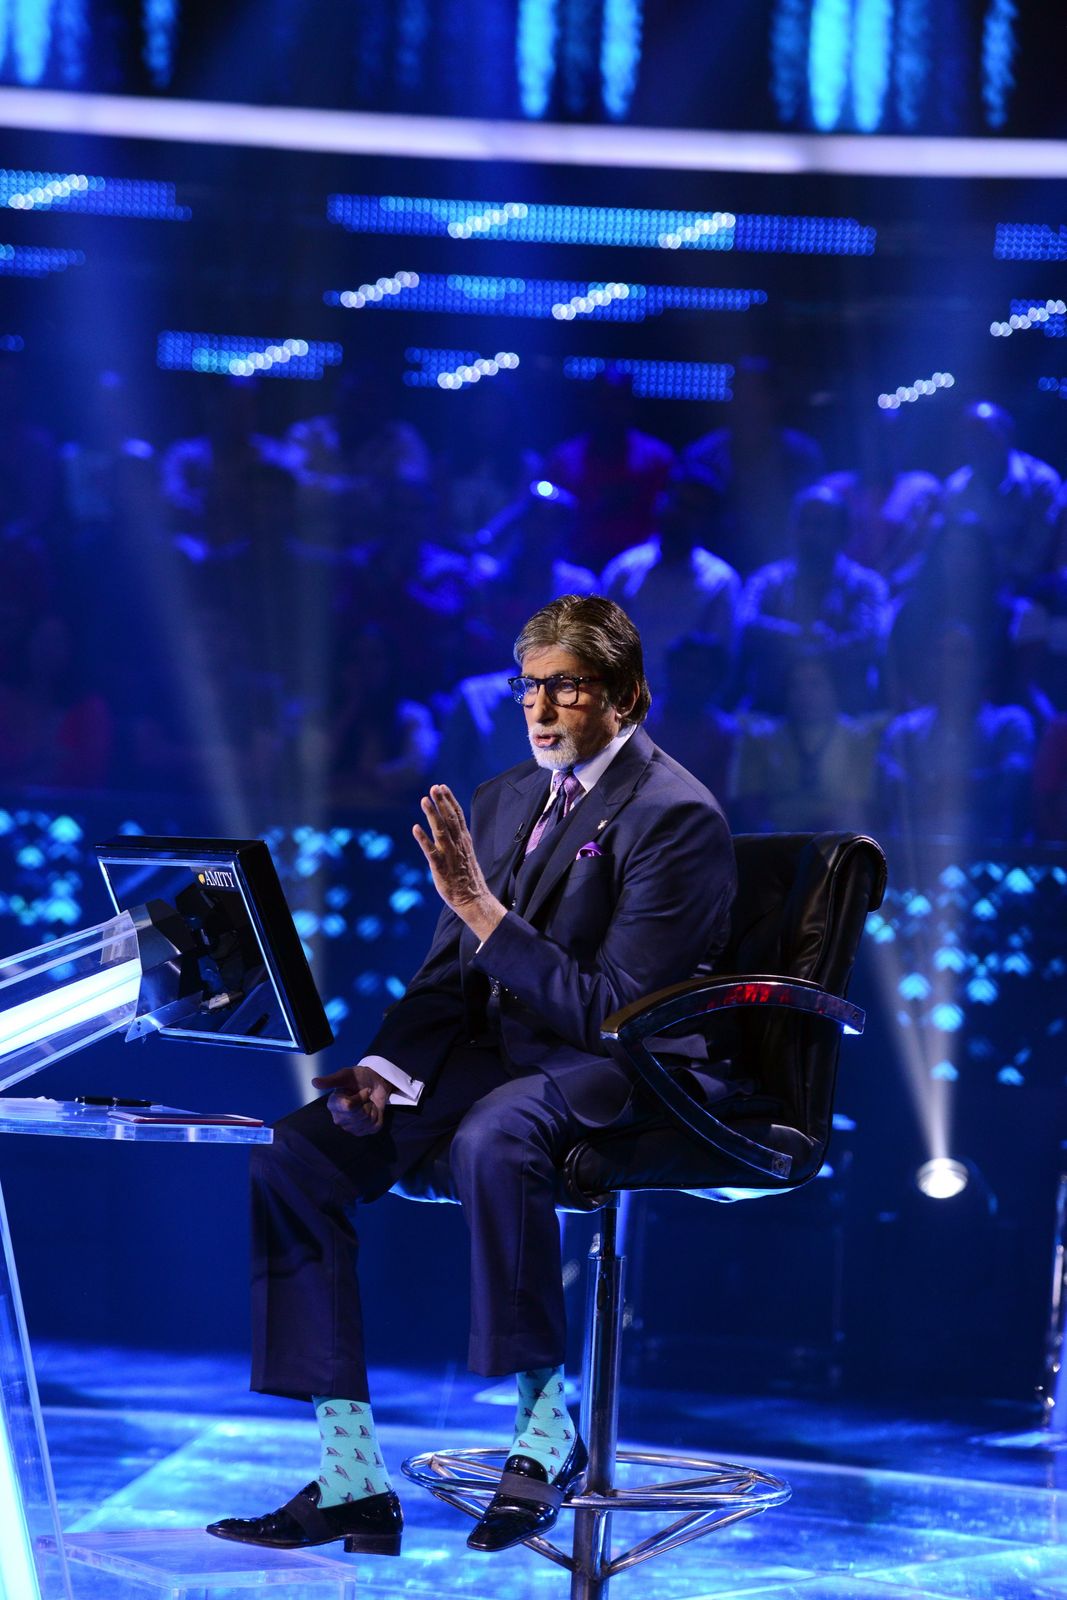 Kaun Banega Crorepati 11 Episode 8: Can You Answer All The Questions From Amitabh Bachchan's Game Show?